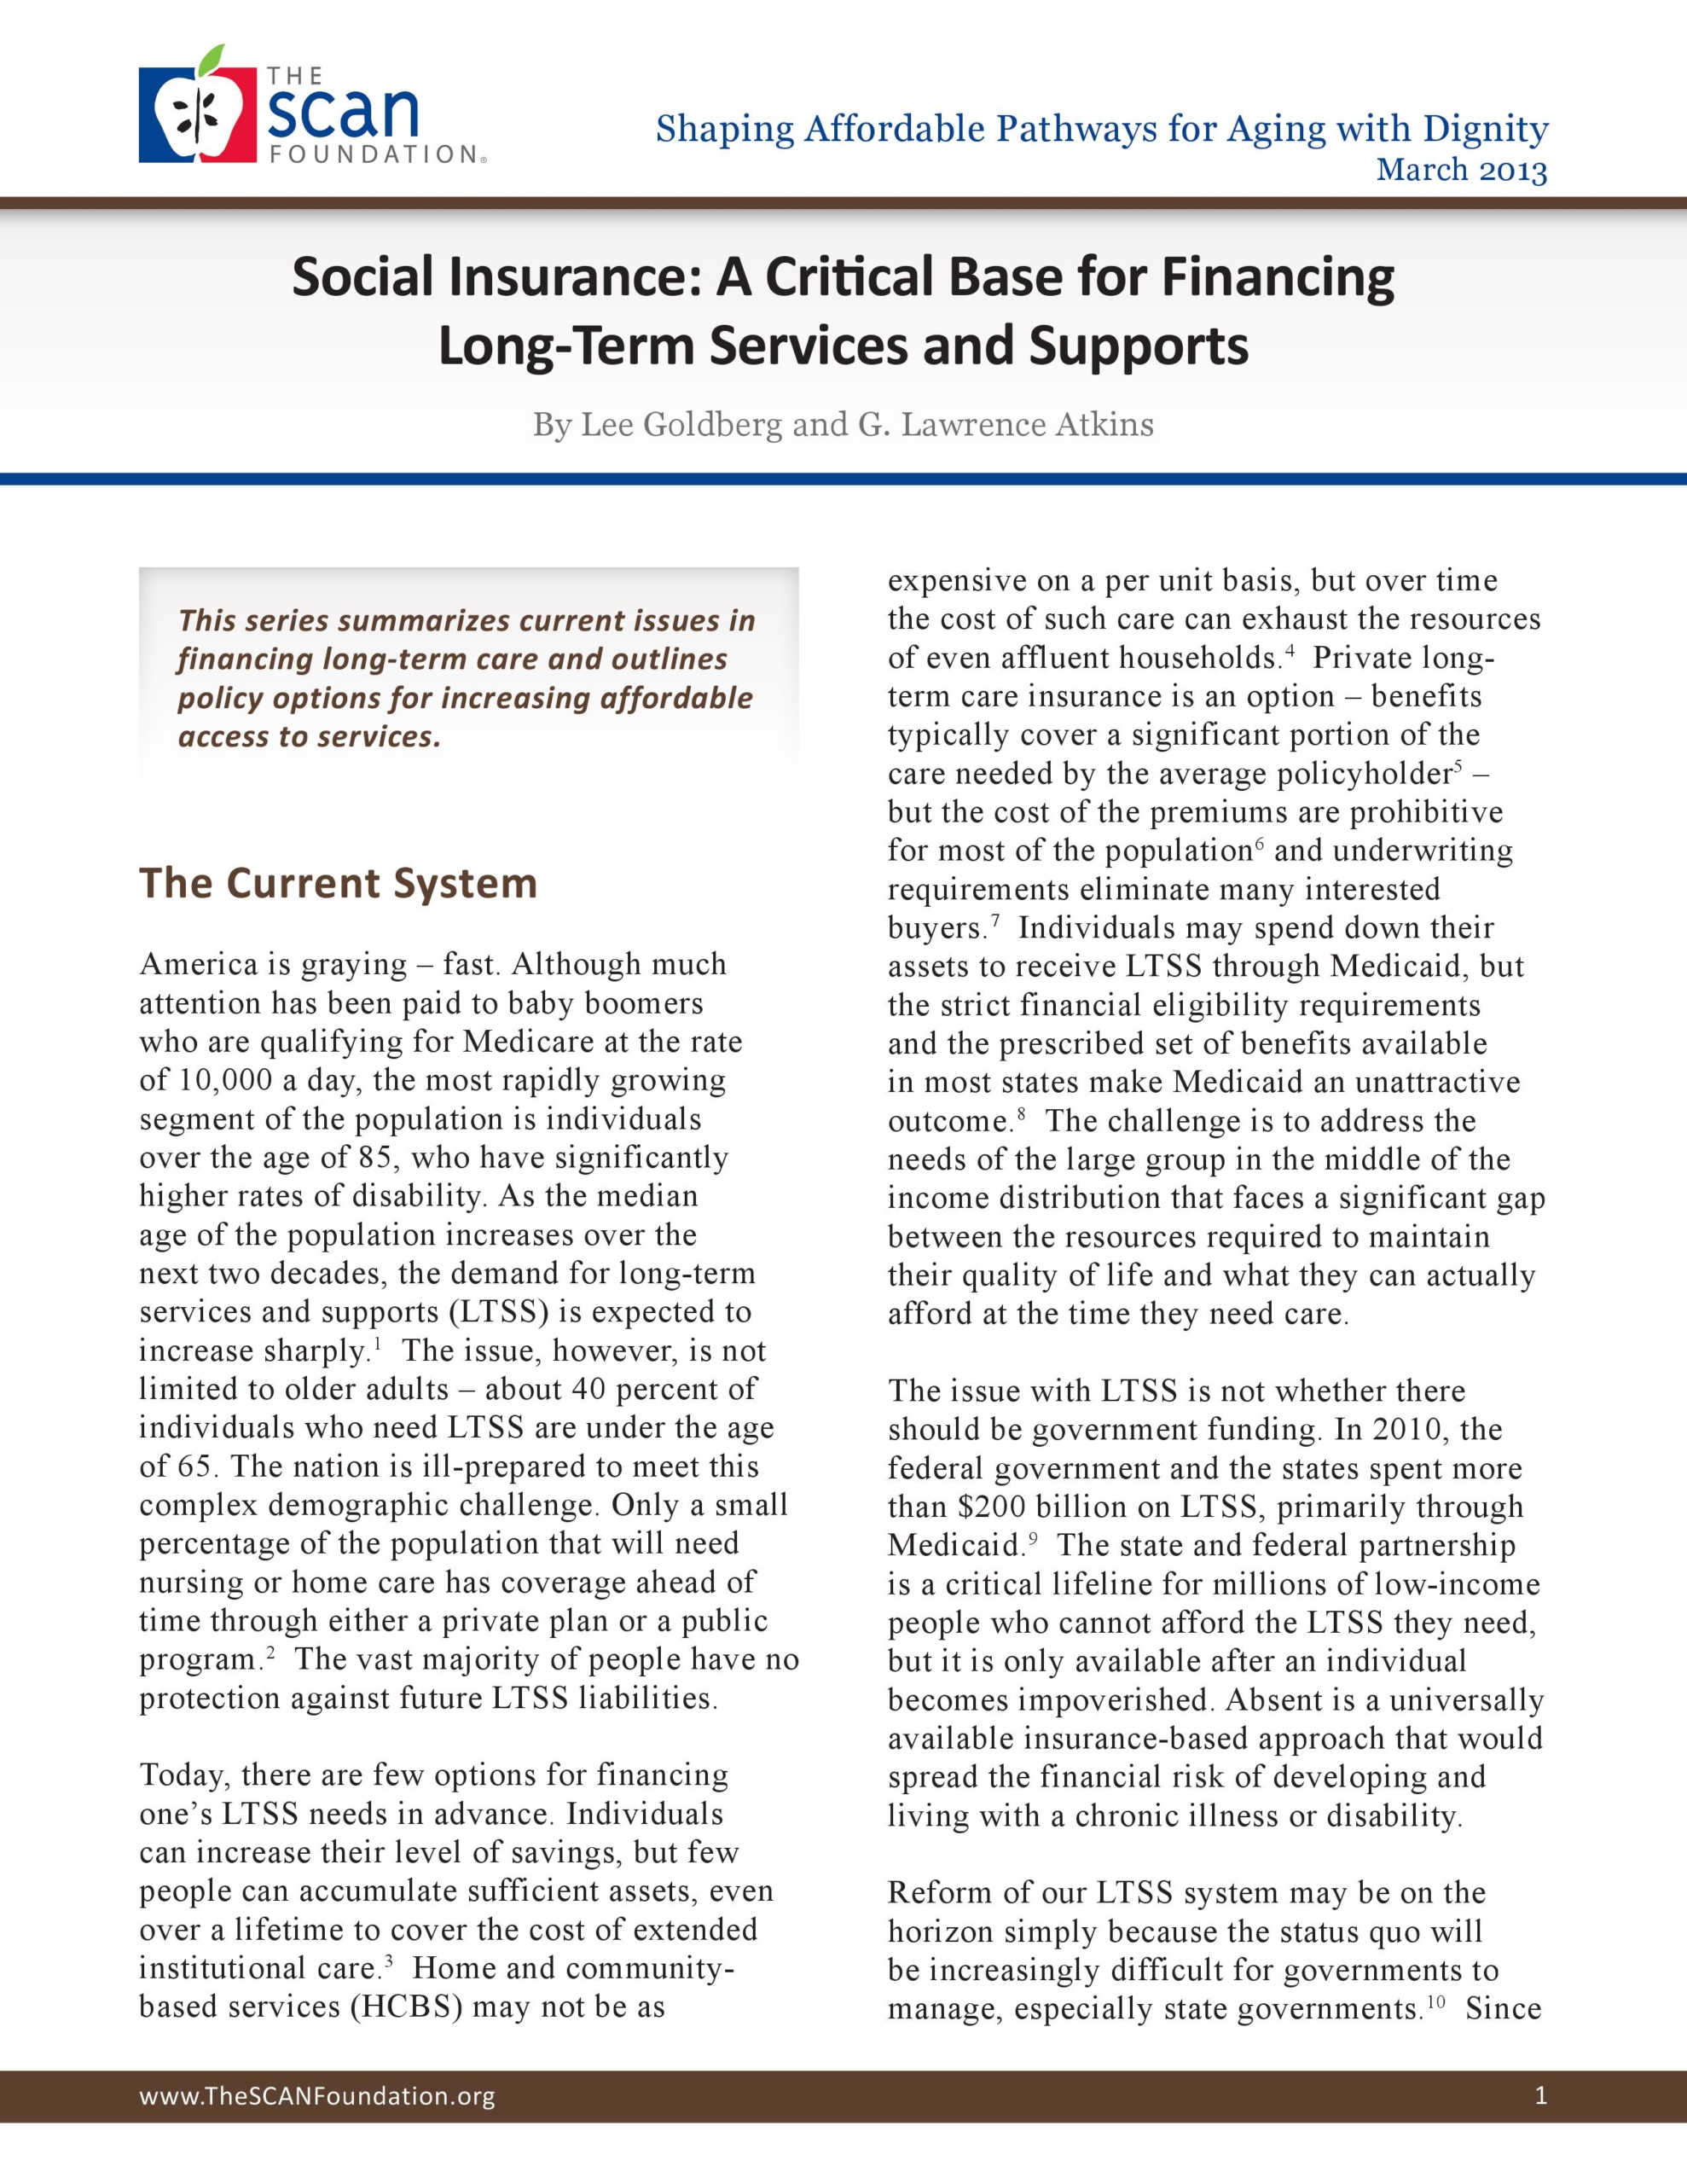 Social Insurance: A Critical Base for Financing Long-Term Services and Supports